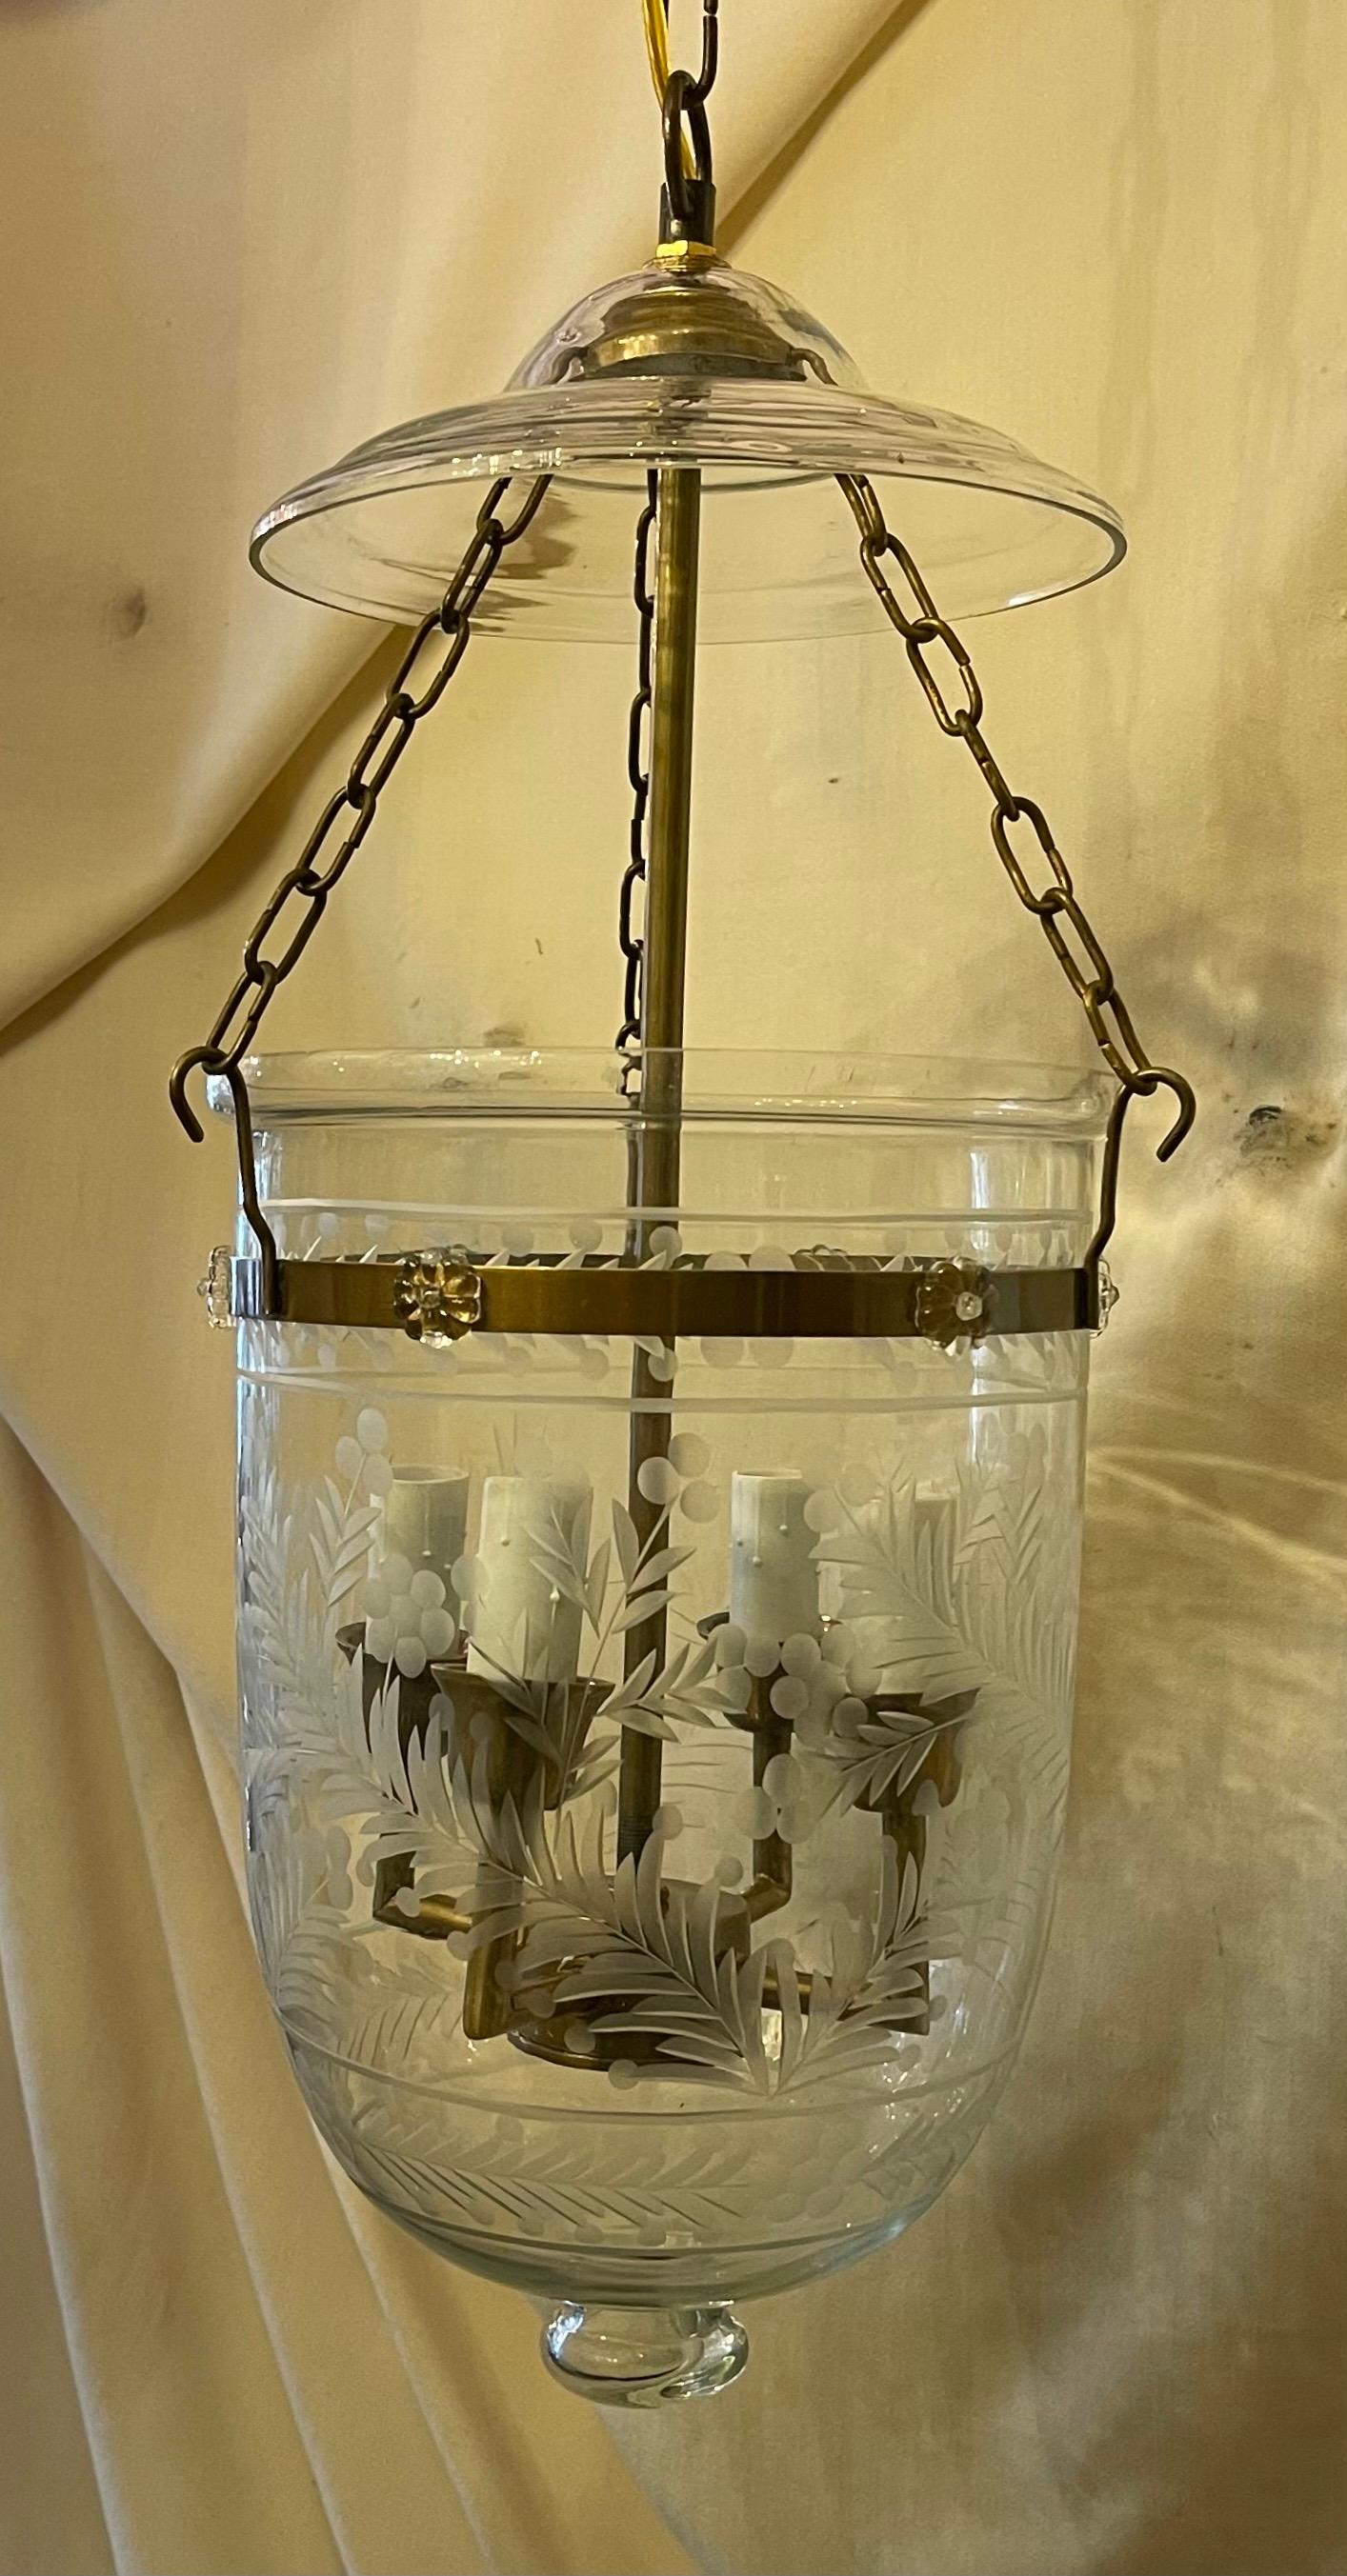 Regency Etched Glass Leaves Flowers Bell Jar Lantern Brass Light Fixtures 4 Available For Sale